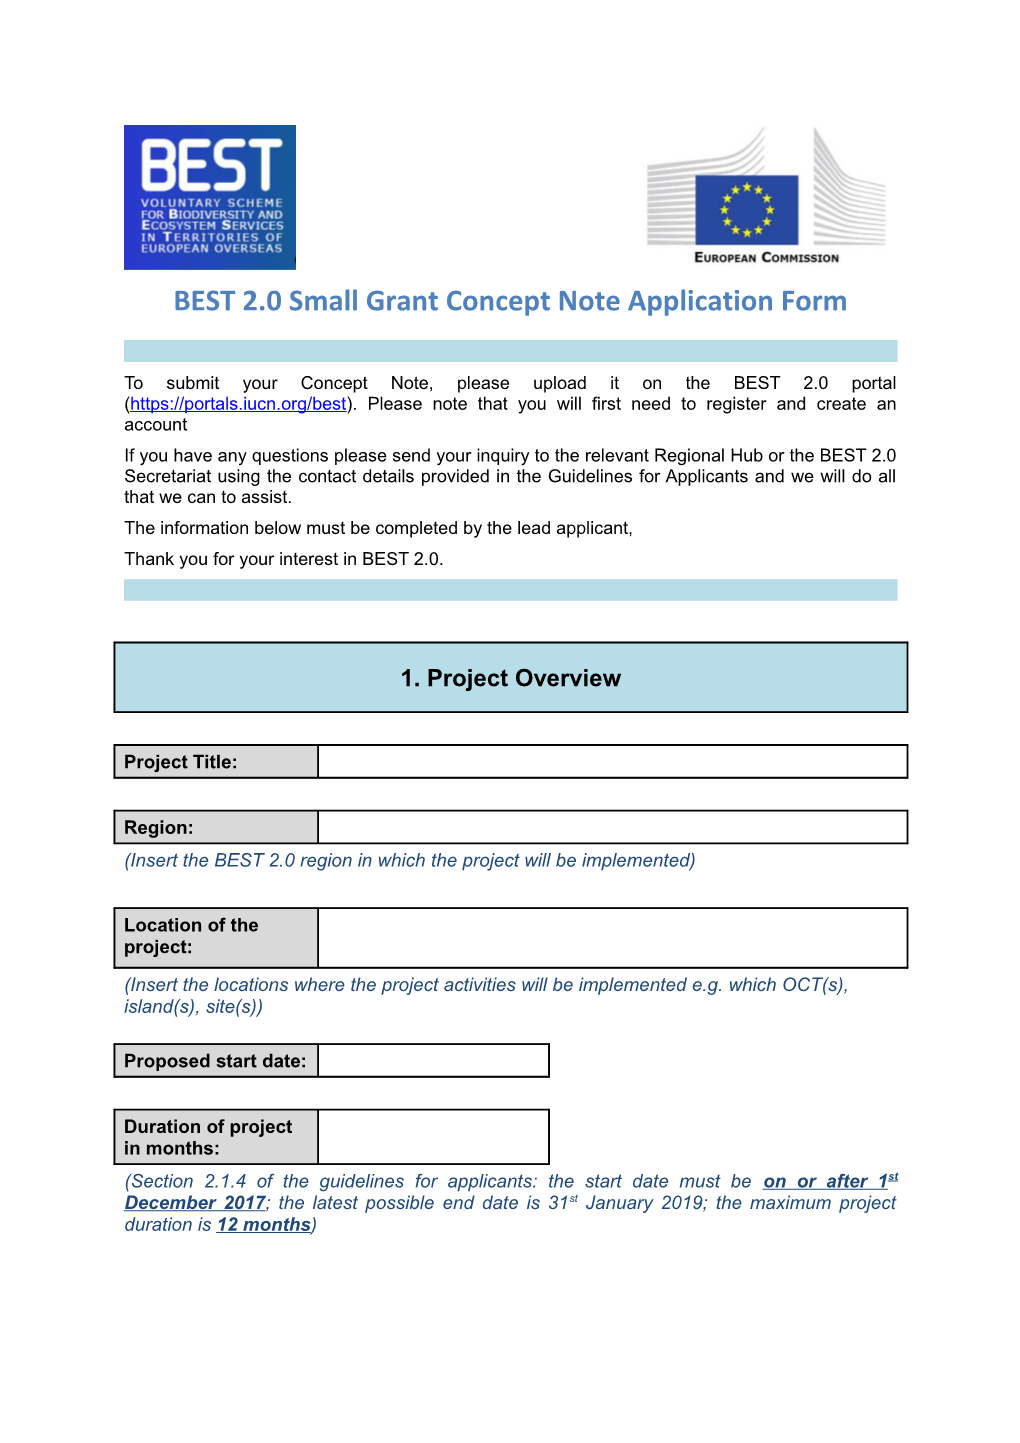 BEST 2.0 Small Grant Concept Note Application Form